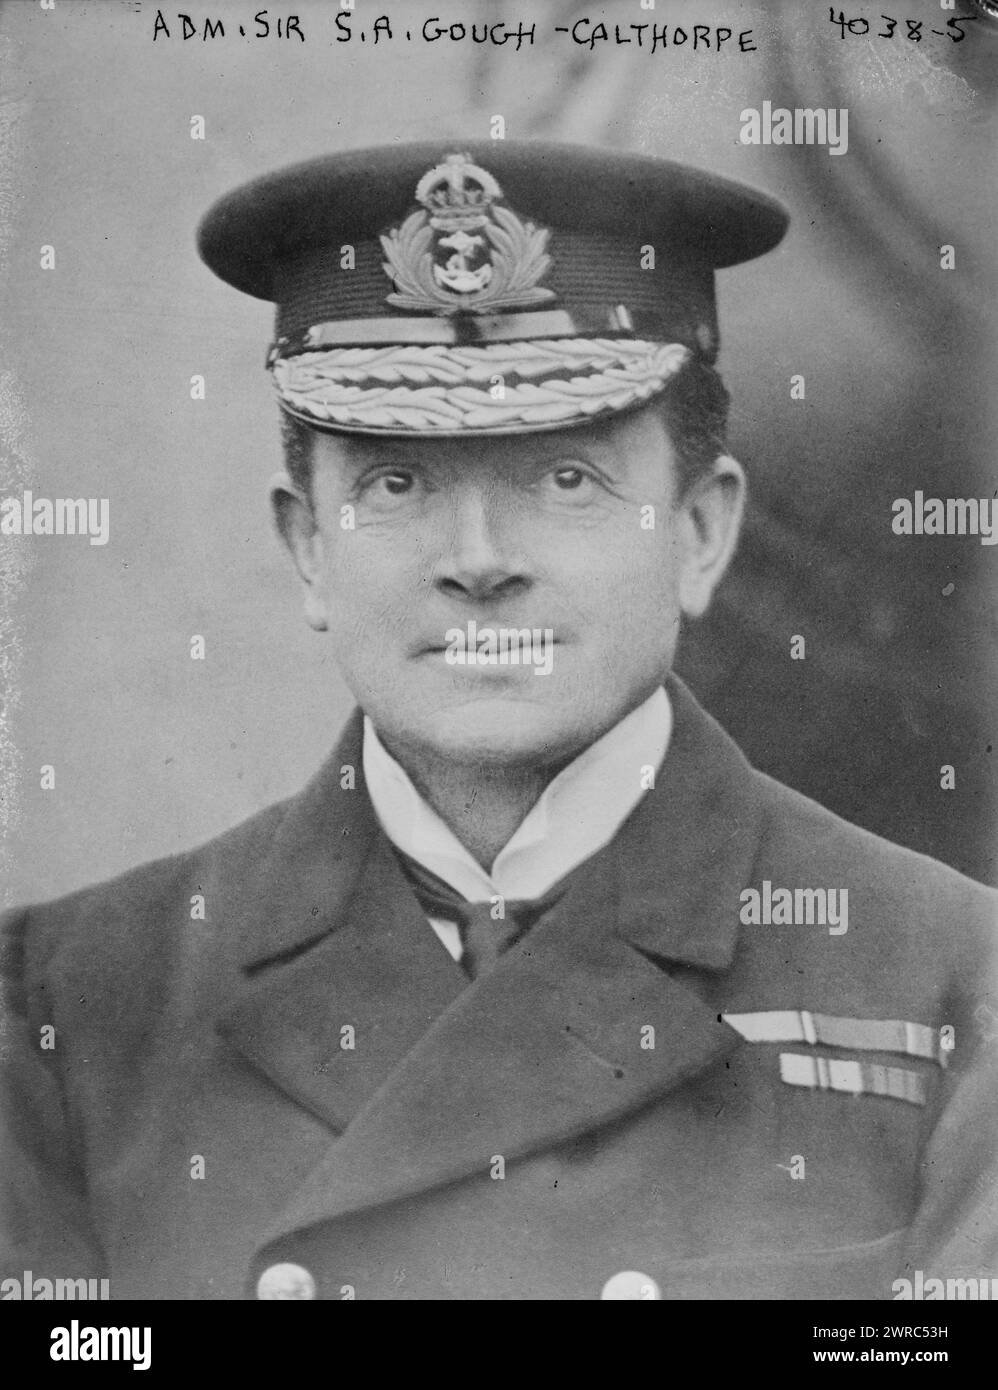 Adm. Sir S.A. Gough - Calthorpe, Photograph shows Sir Somerset Arthur Gough-Calthorpe (1865-1937), (Sir Somerset Calthorpe), who was a Royal Navy officer during conflicts including World War I., between ca. 1915 and ca. 1920, Glass negatives, 1 negative: glass Stock Photo